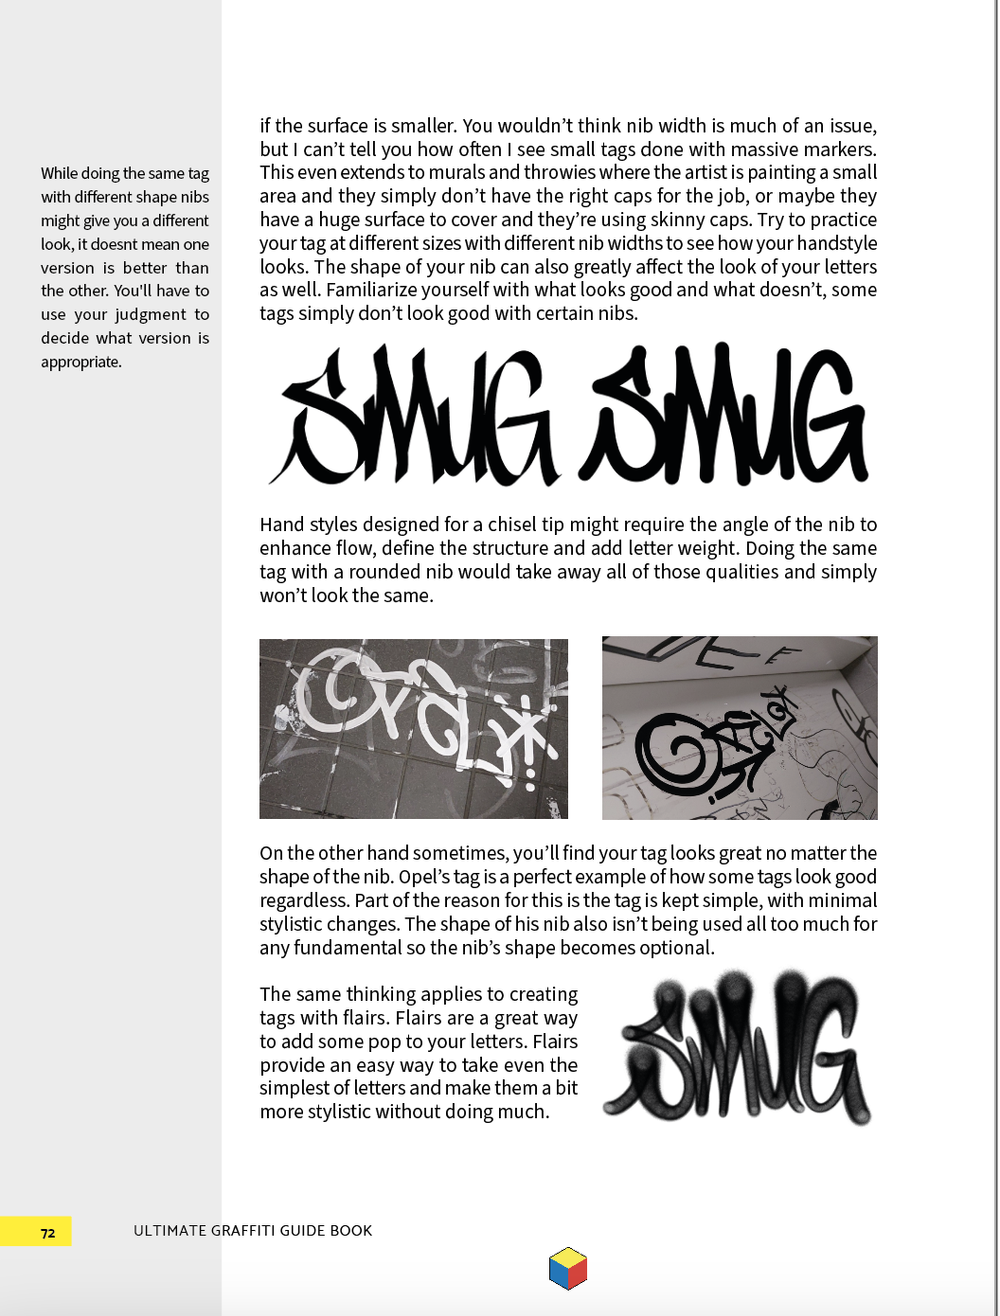 5 Easy Graffiti Words for Beginners: A Step-by-Step Tutorial